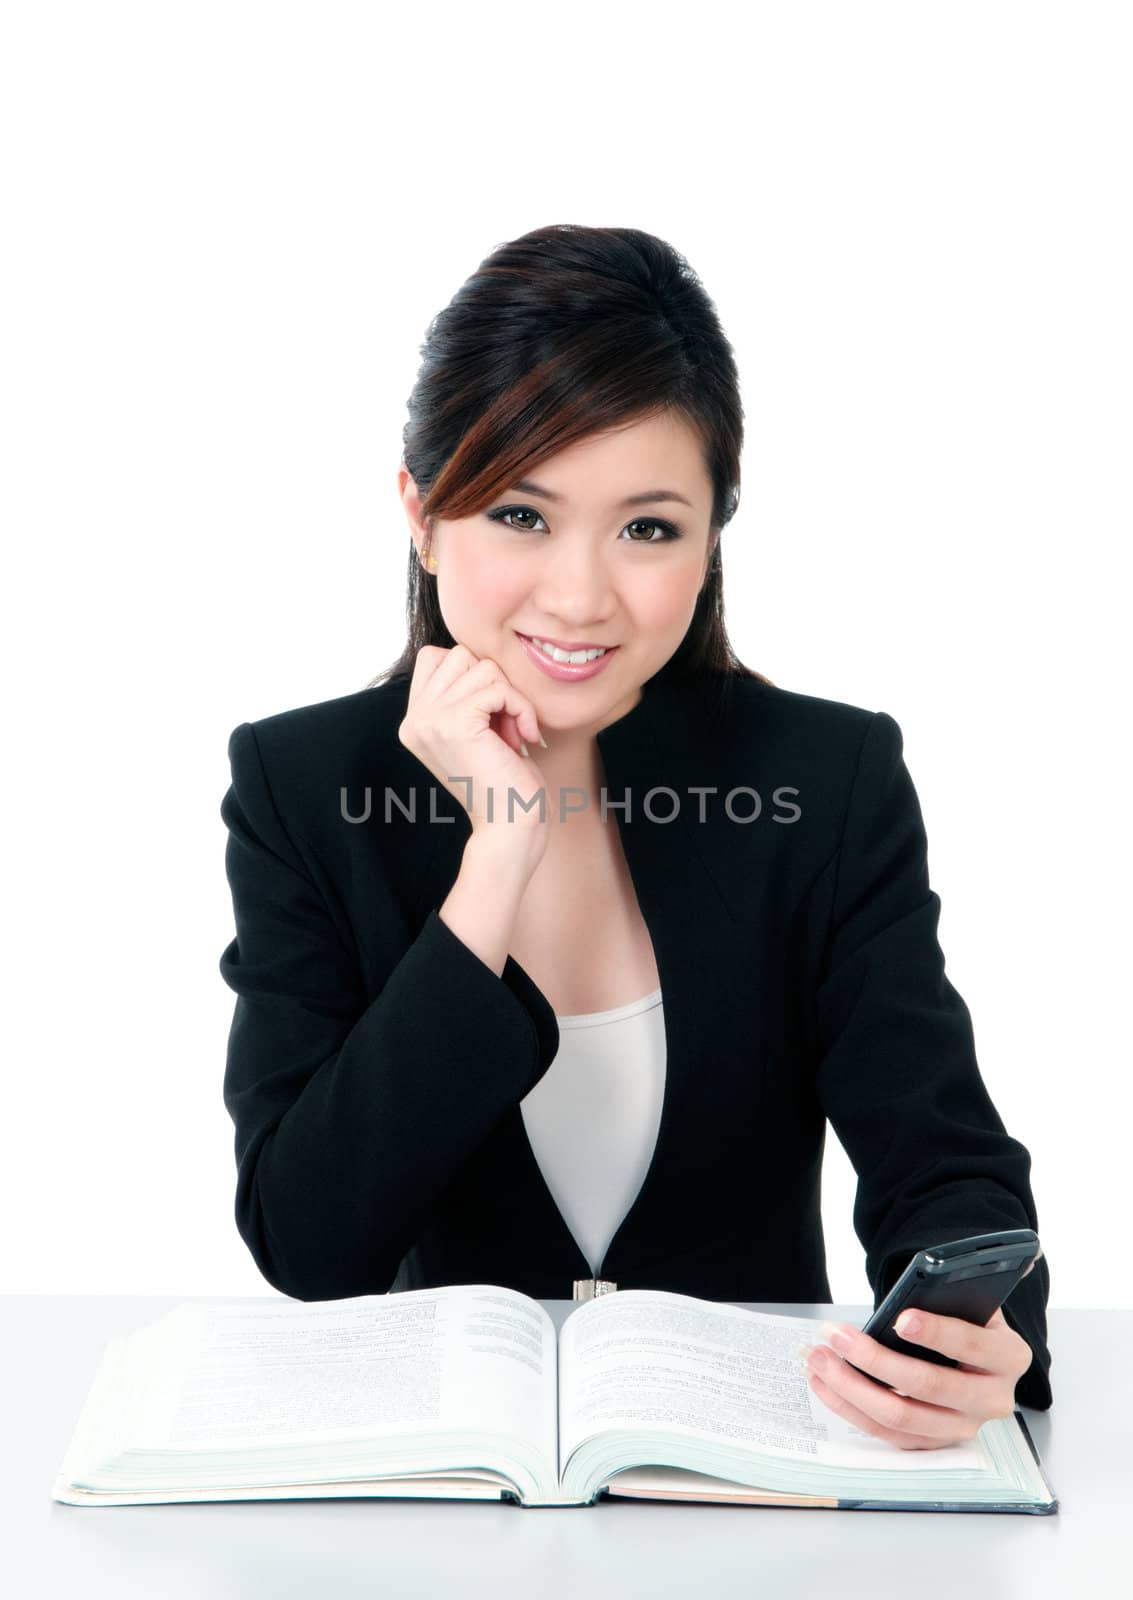 Portrait of a beautiful young businesswoman holding a mobile phone over white background.